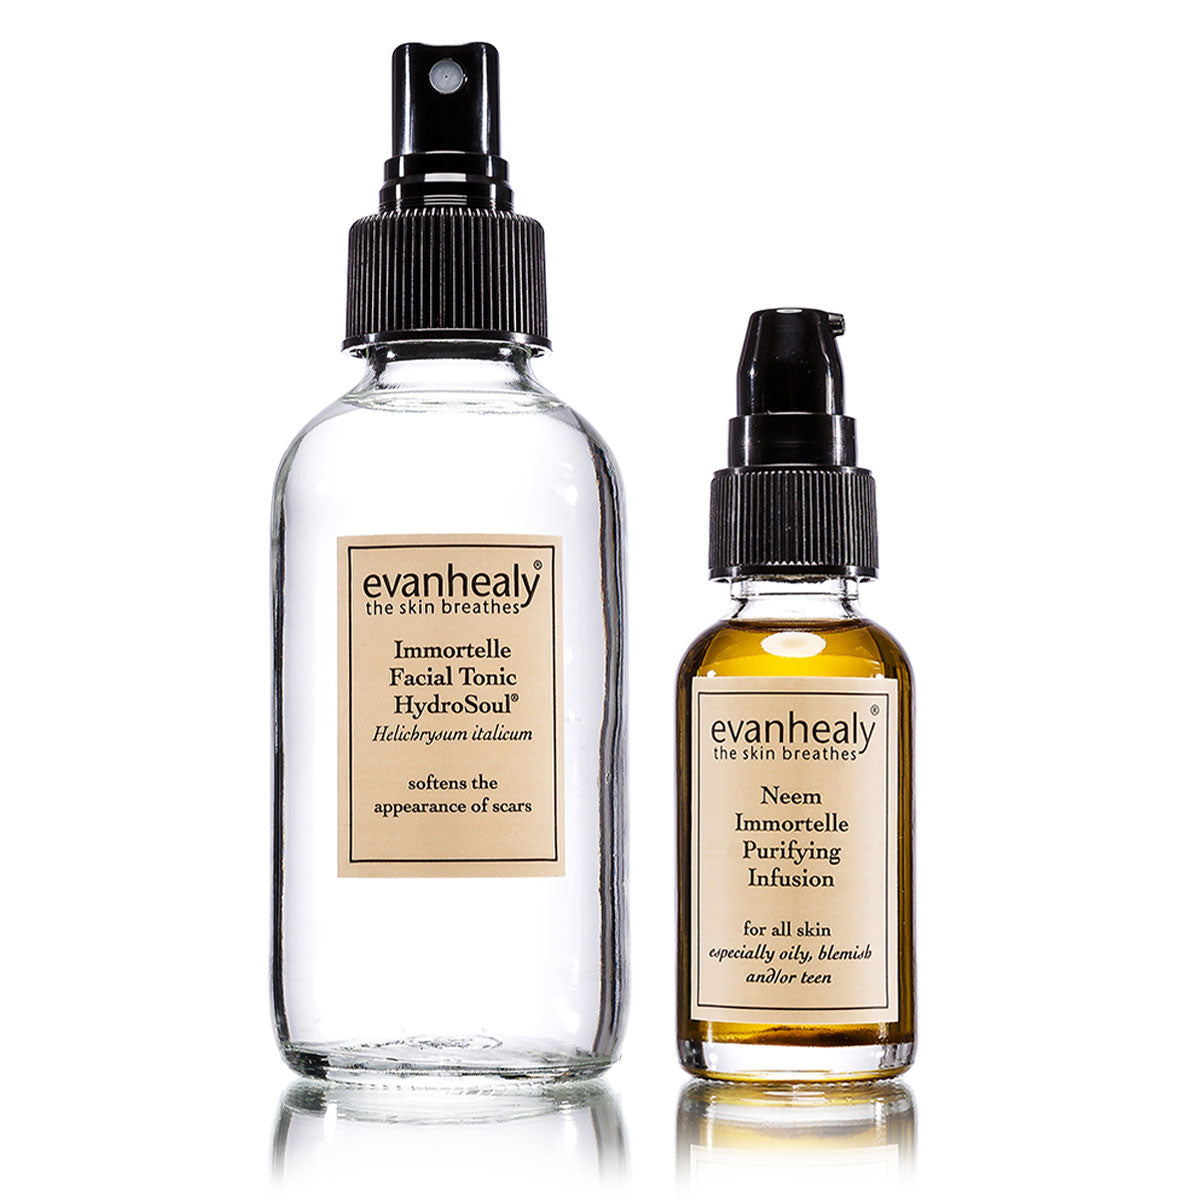 evanhealy Immortelle Facial Tonic HydroSoul and Neem Immortelle Purifying Infusion